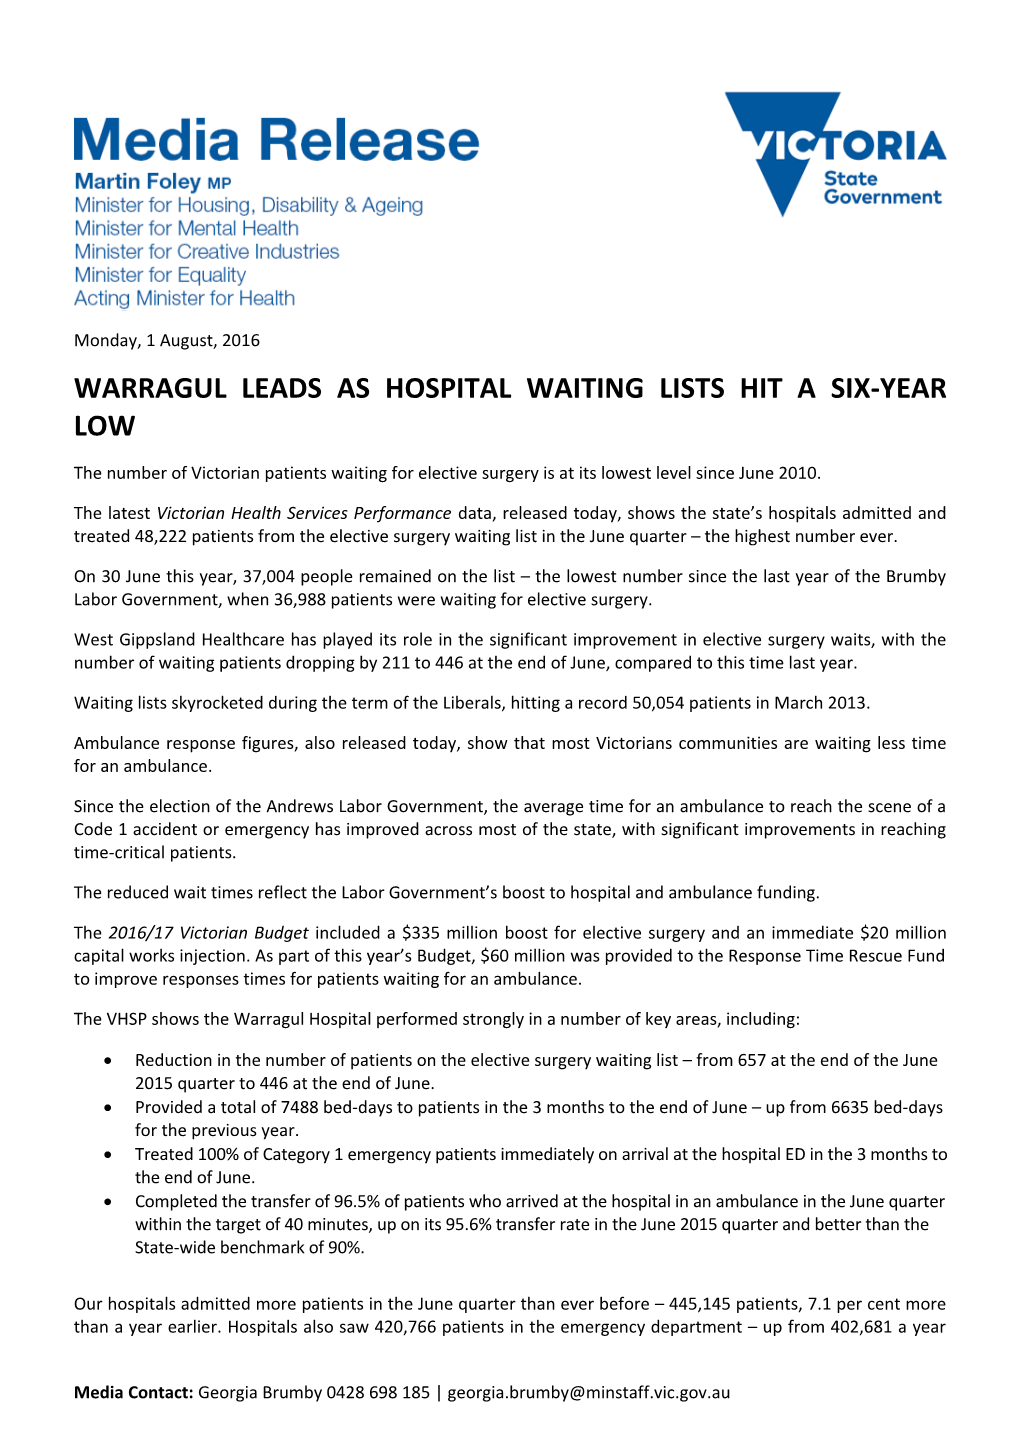 Warragul Leads As Hospital Waiting Lists Hit a Six-Year Low